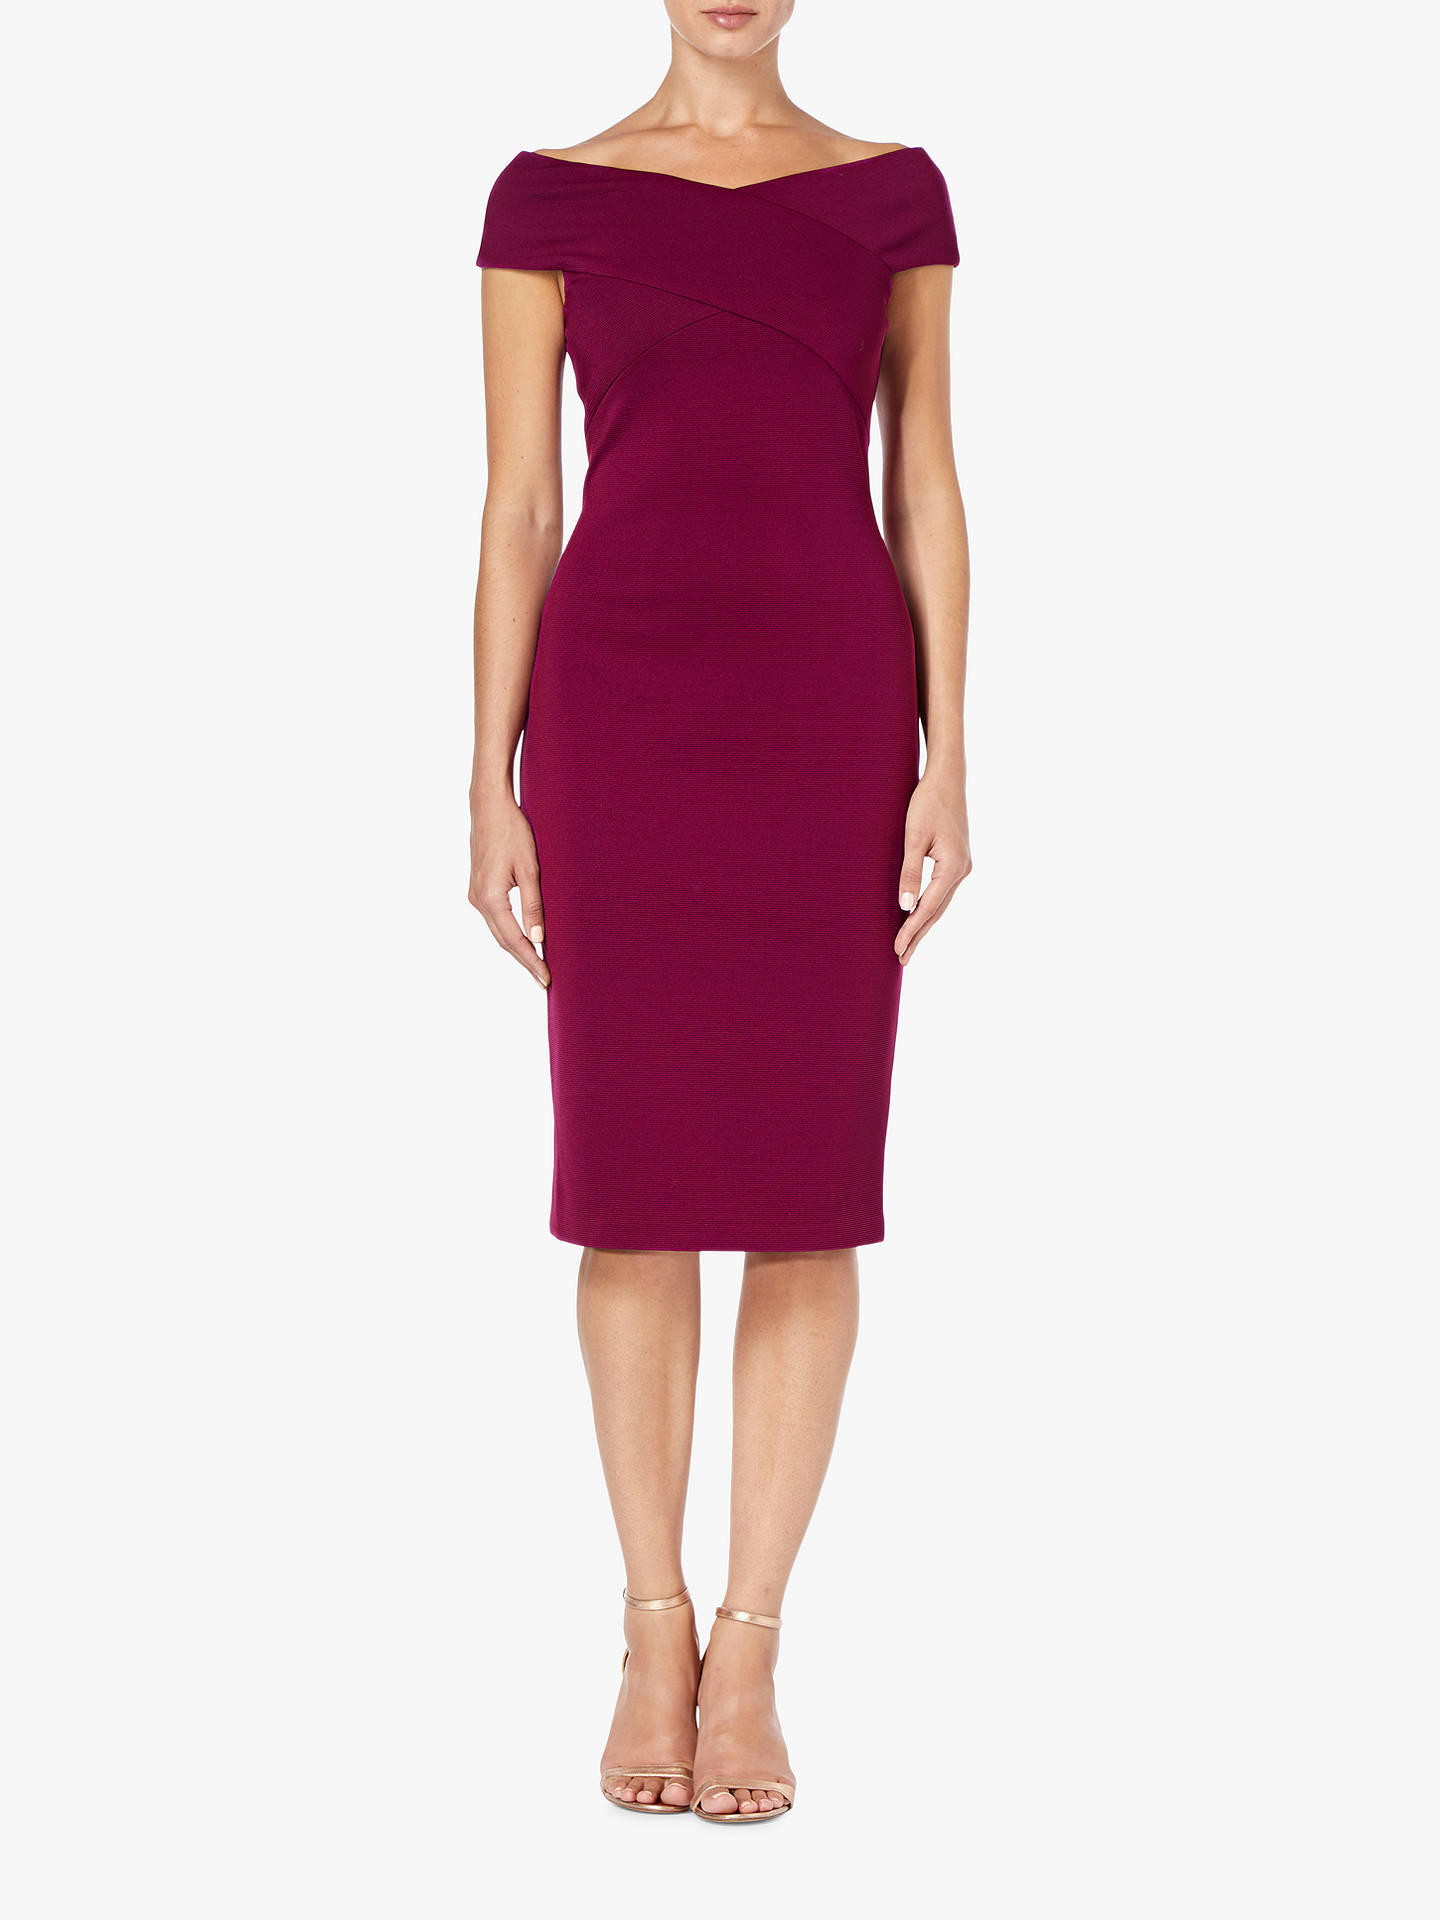 Adrianna Papell Sheath Crossover Dress, Wildberry at John Lewis & Partners